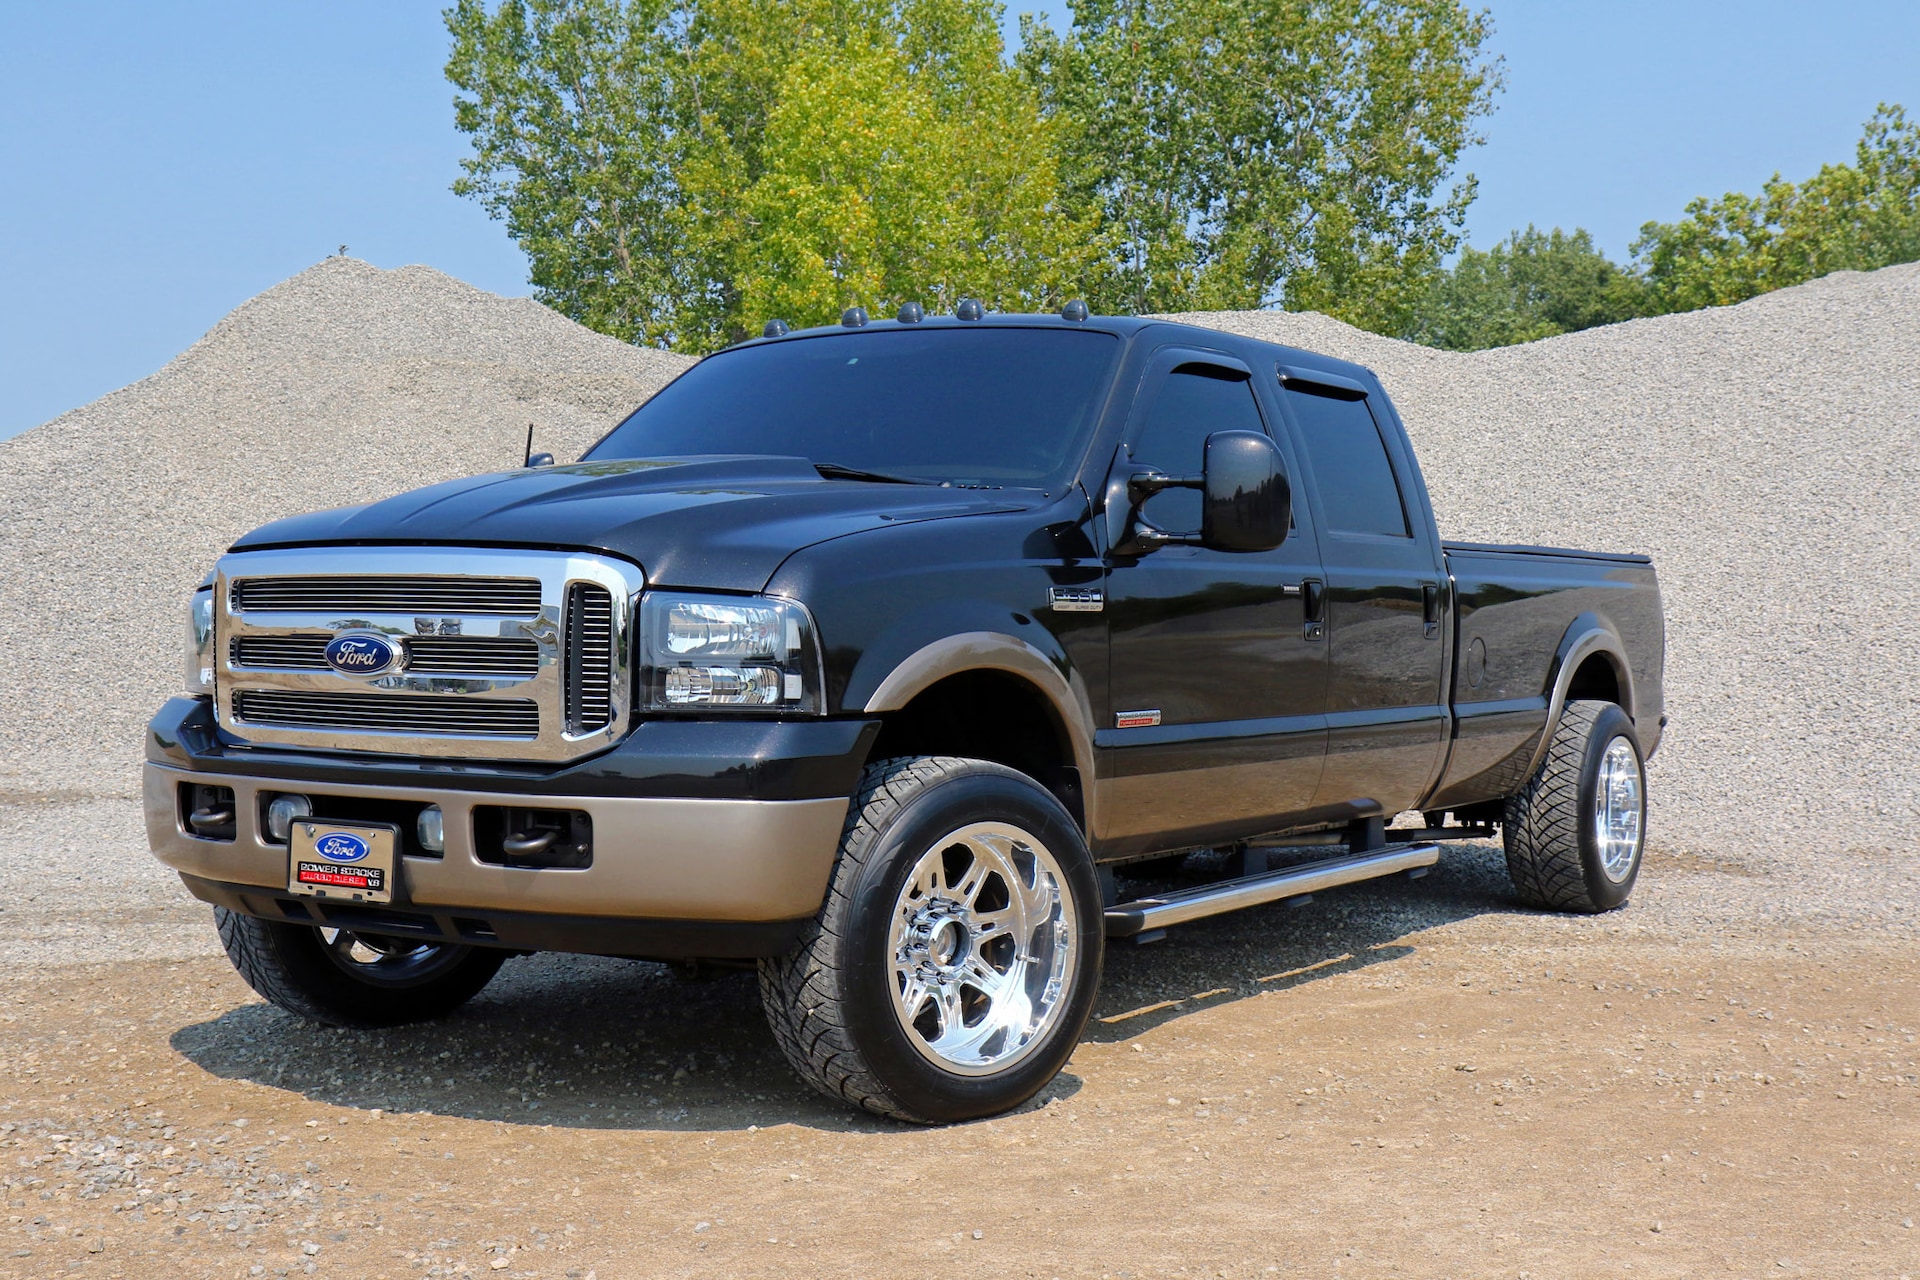 2005 Ford F-350: Root Beer Float